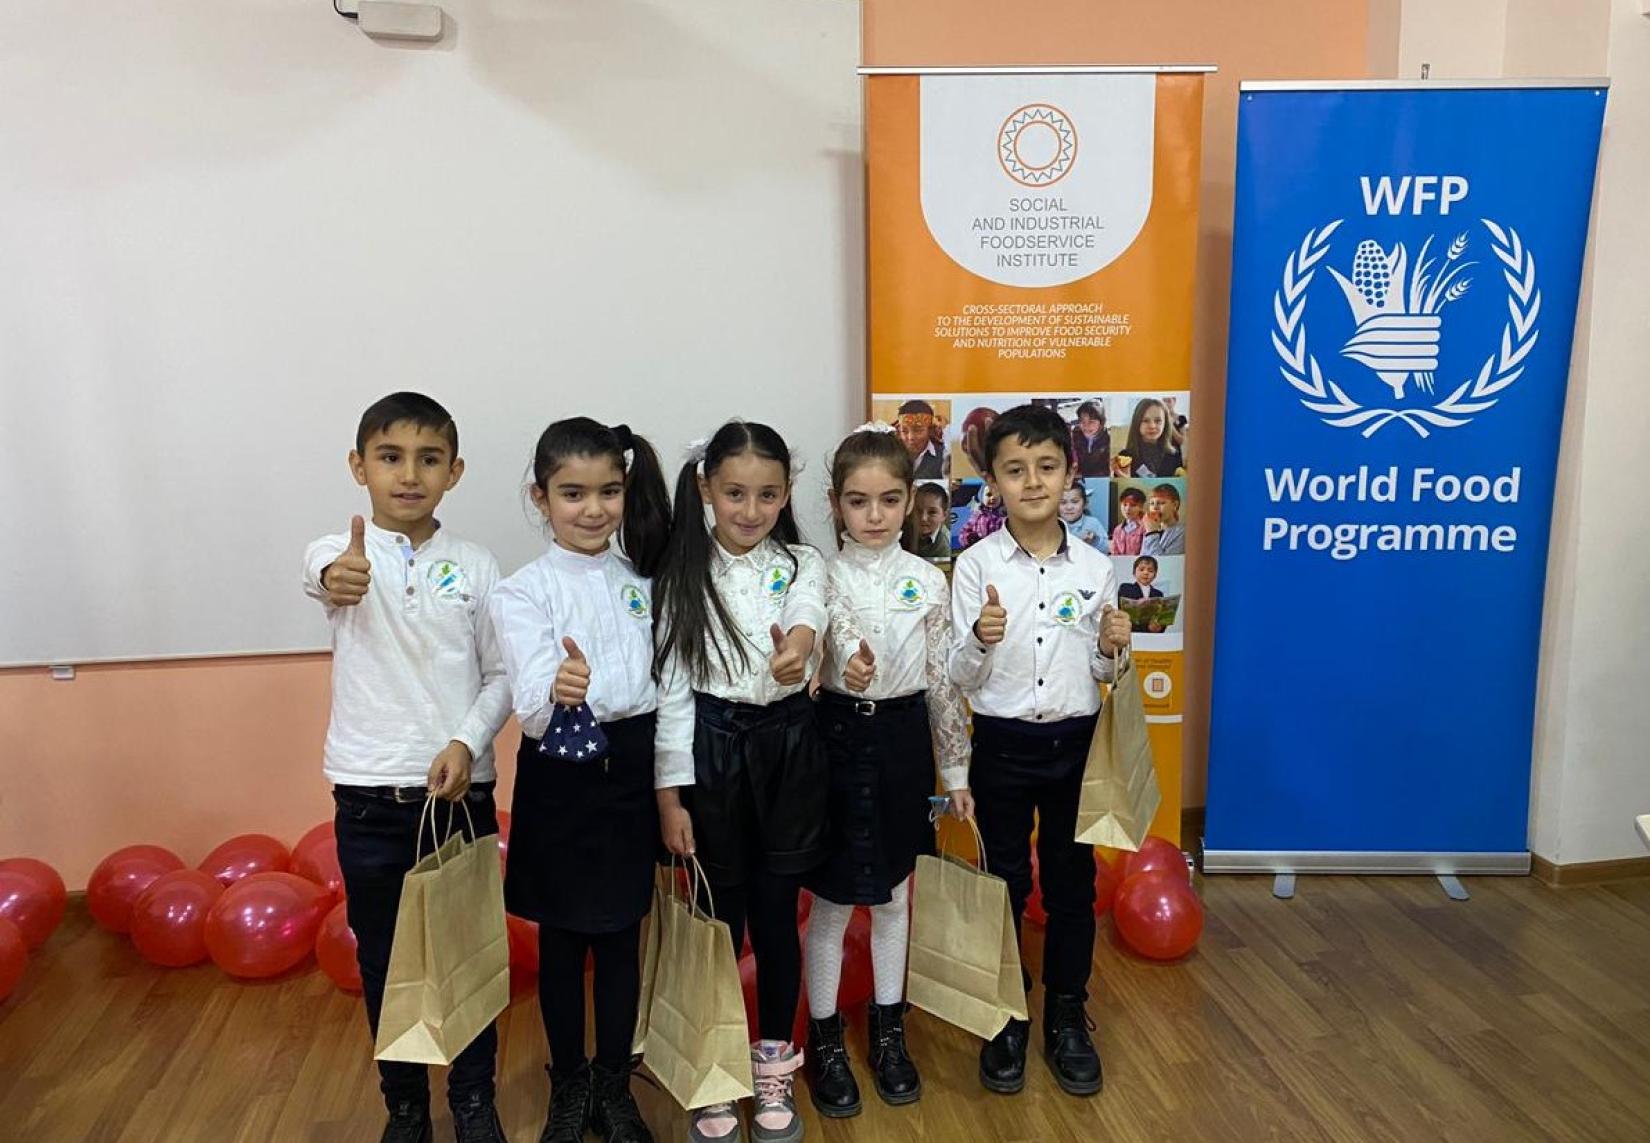 Schoolchildren with gifts from WFP.